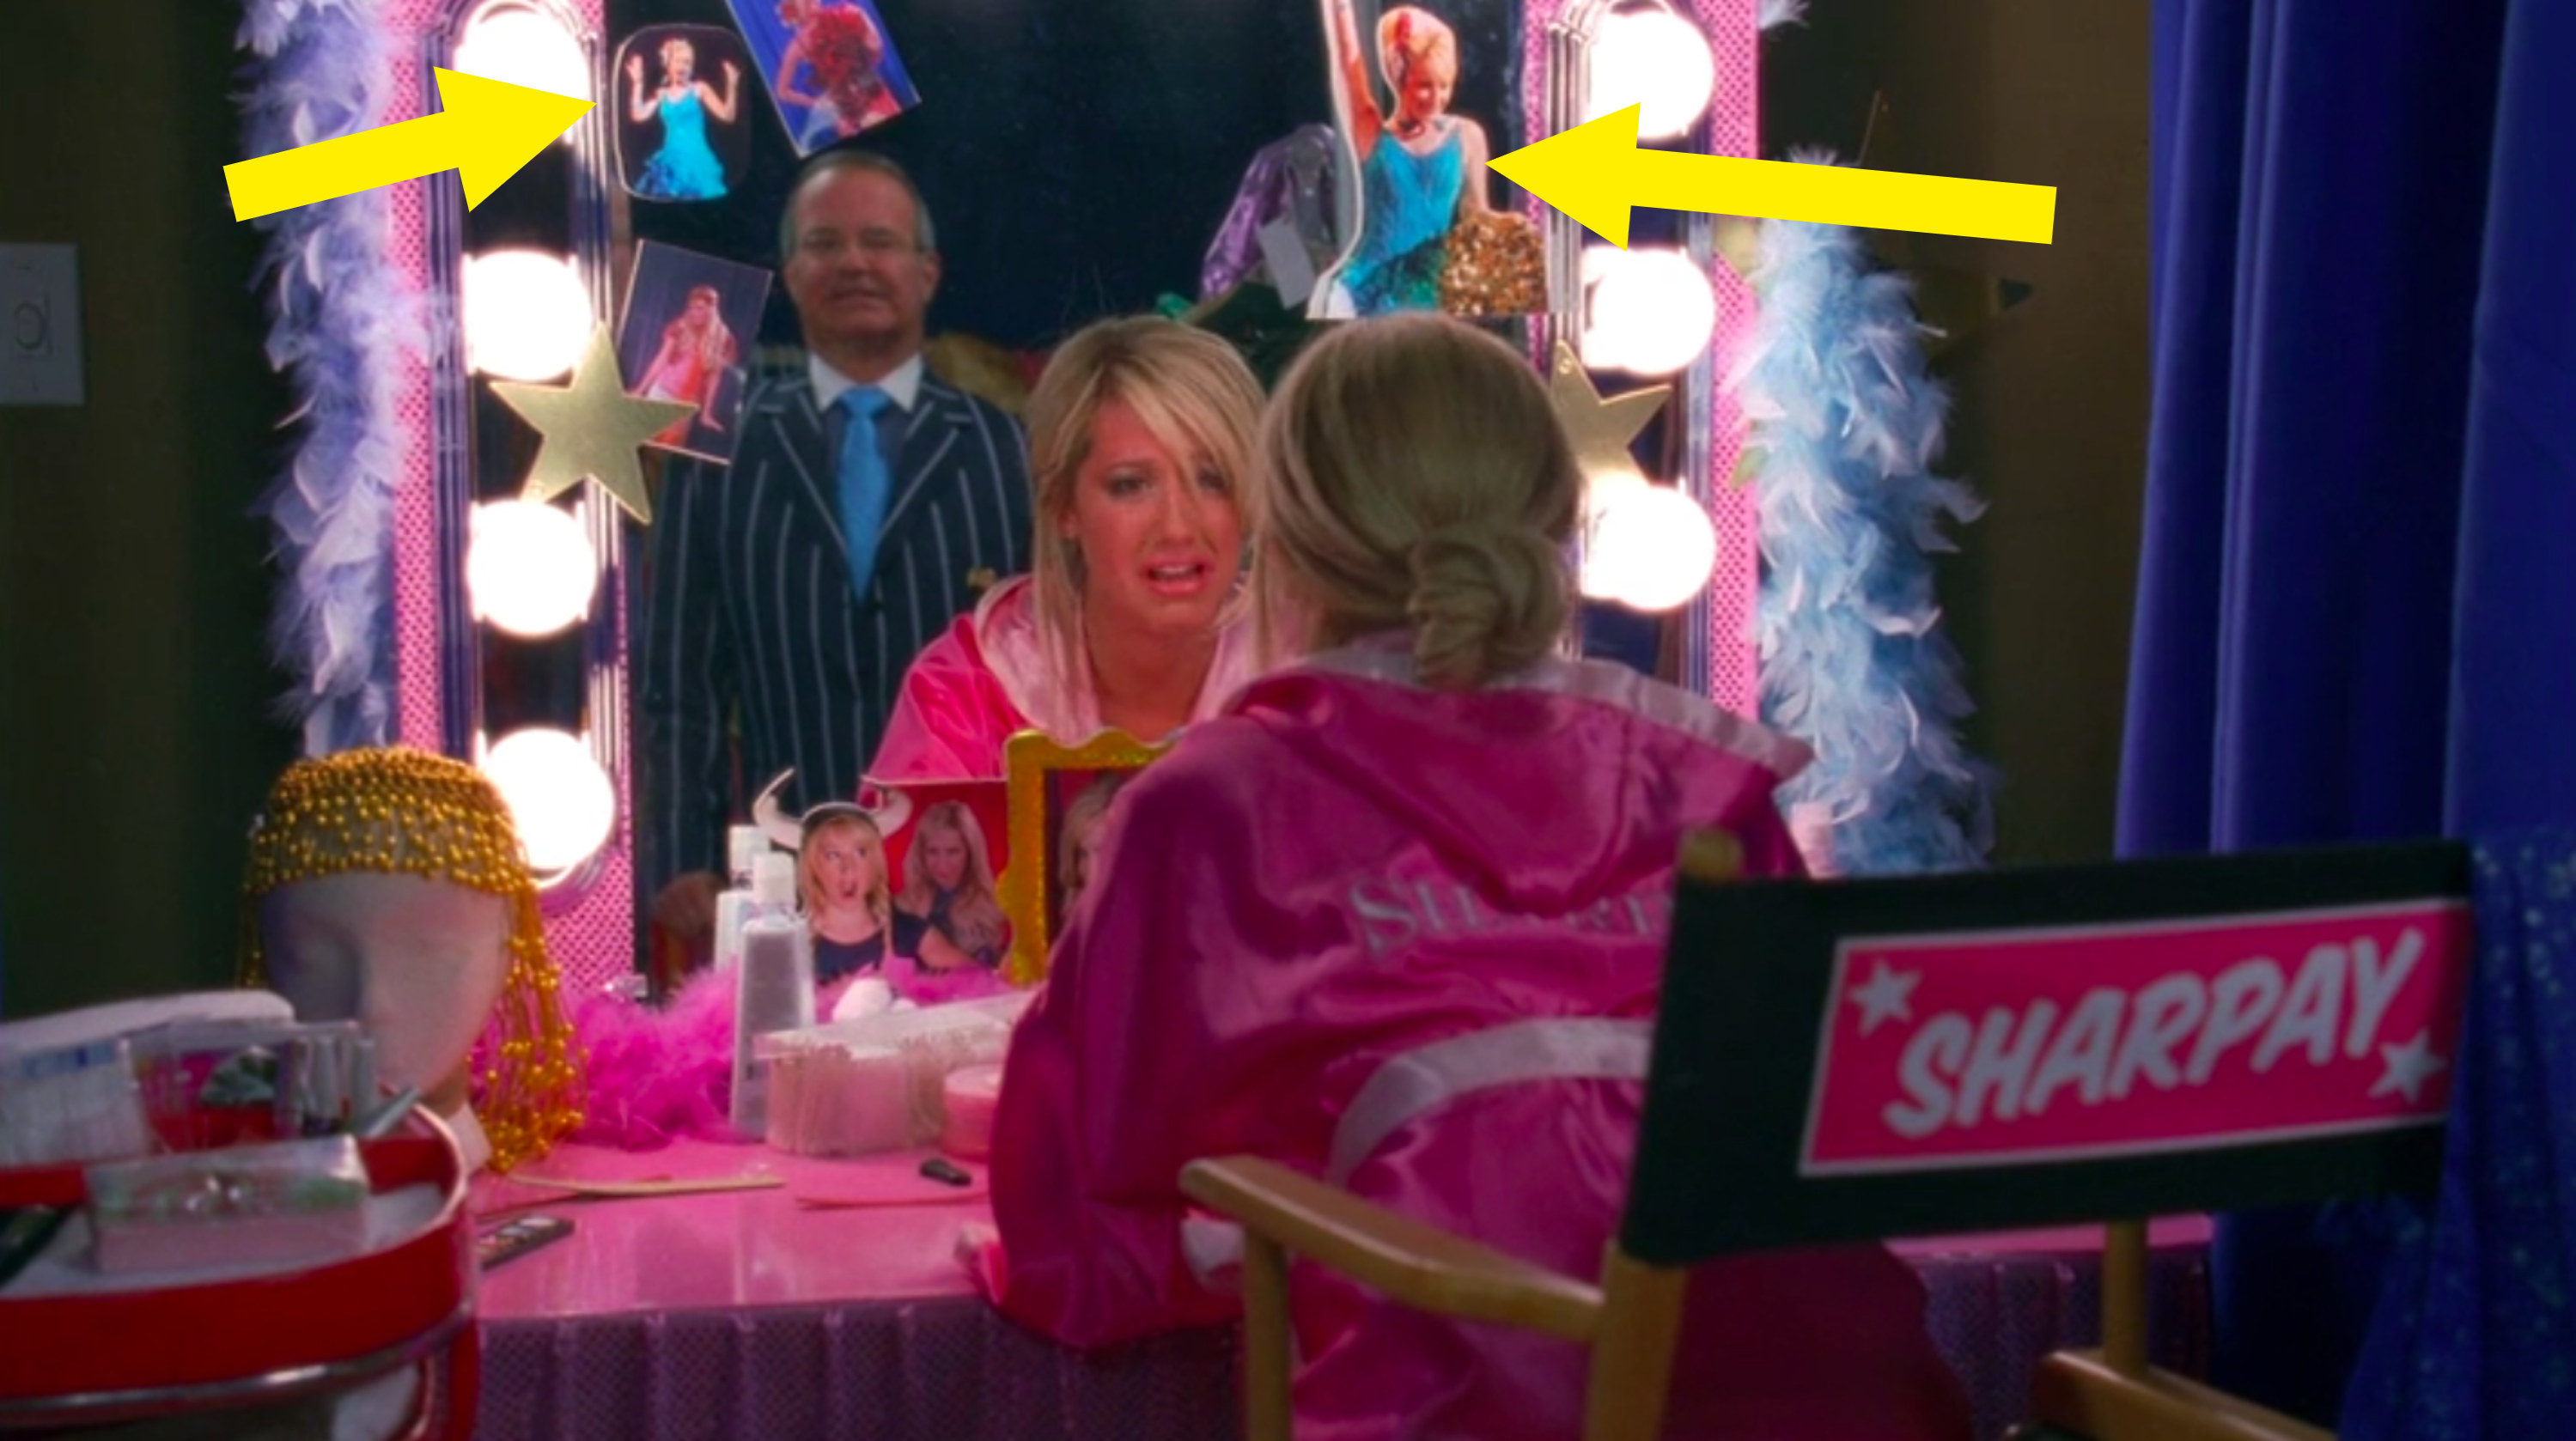 The images from &quot;Bop to the Top&quot; on Sharpay&#x27;s mirror are highlighted